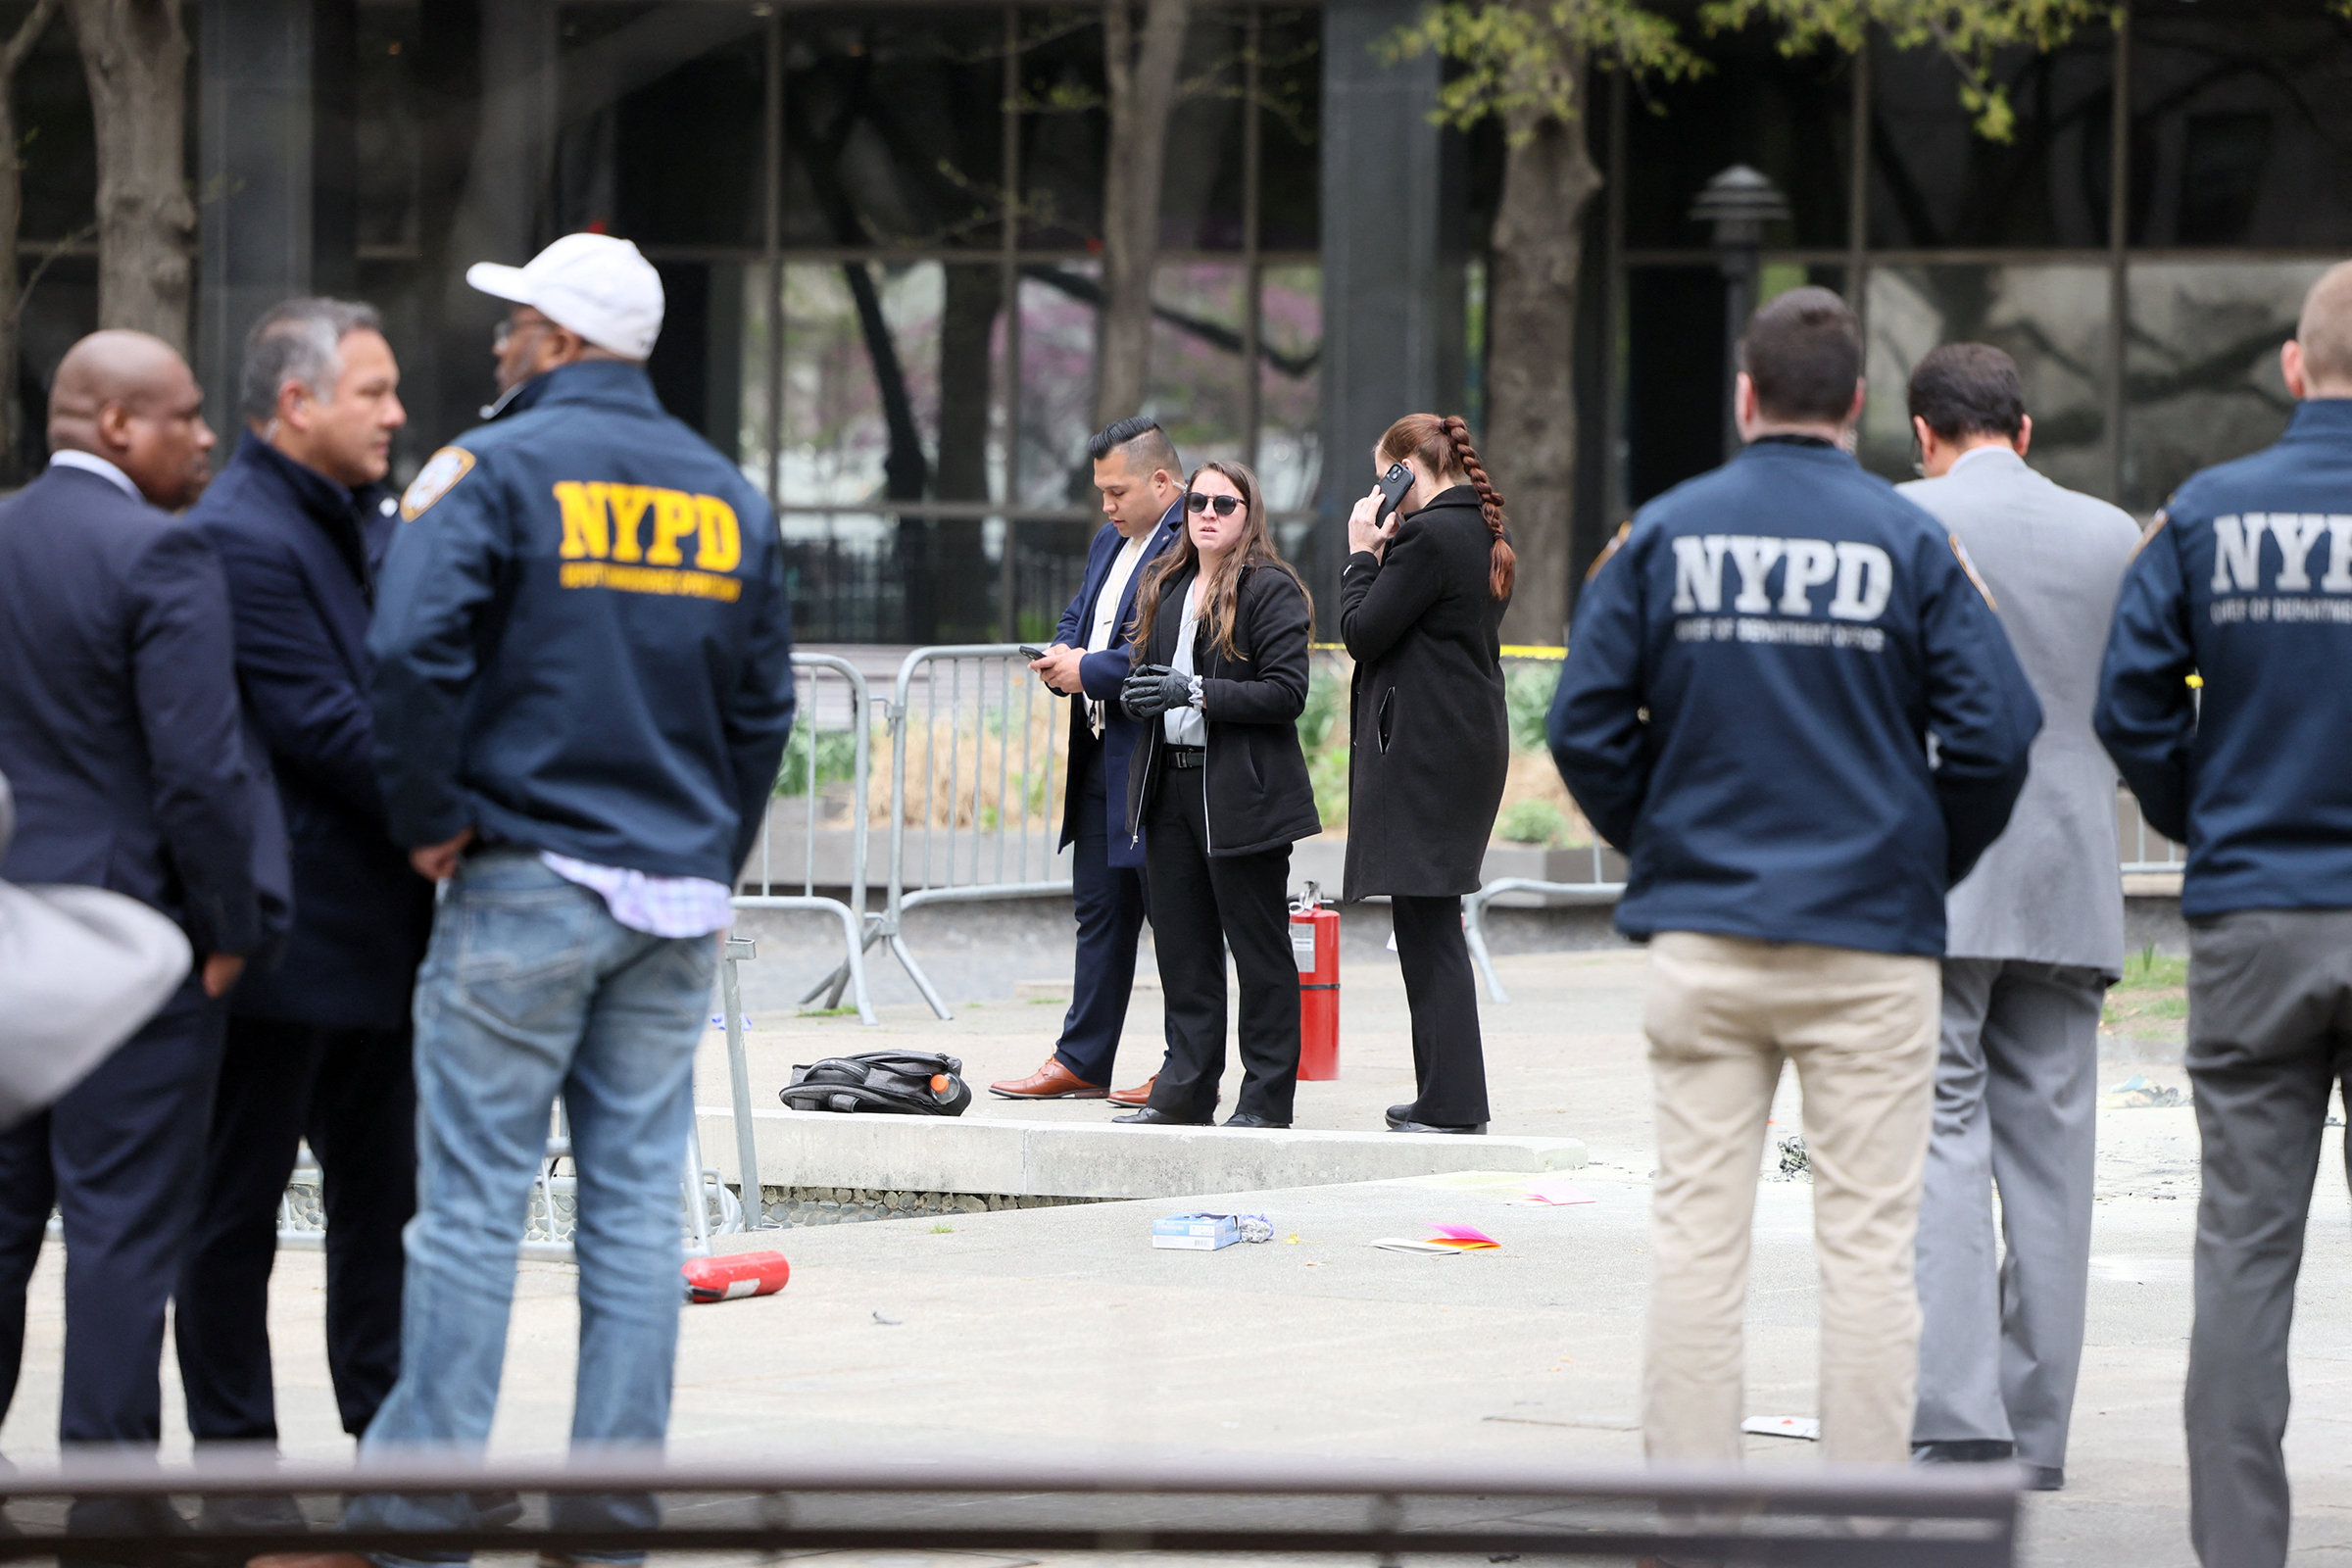 Emergency personnel respond to a report of a person covered in flames outside the courthouse where former US President Donald Trump's criminal hush money trial is underway, in New York, on April 19.